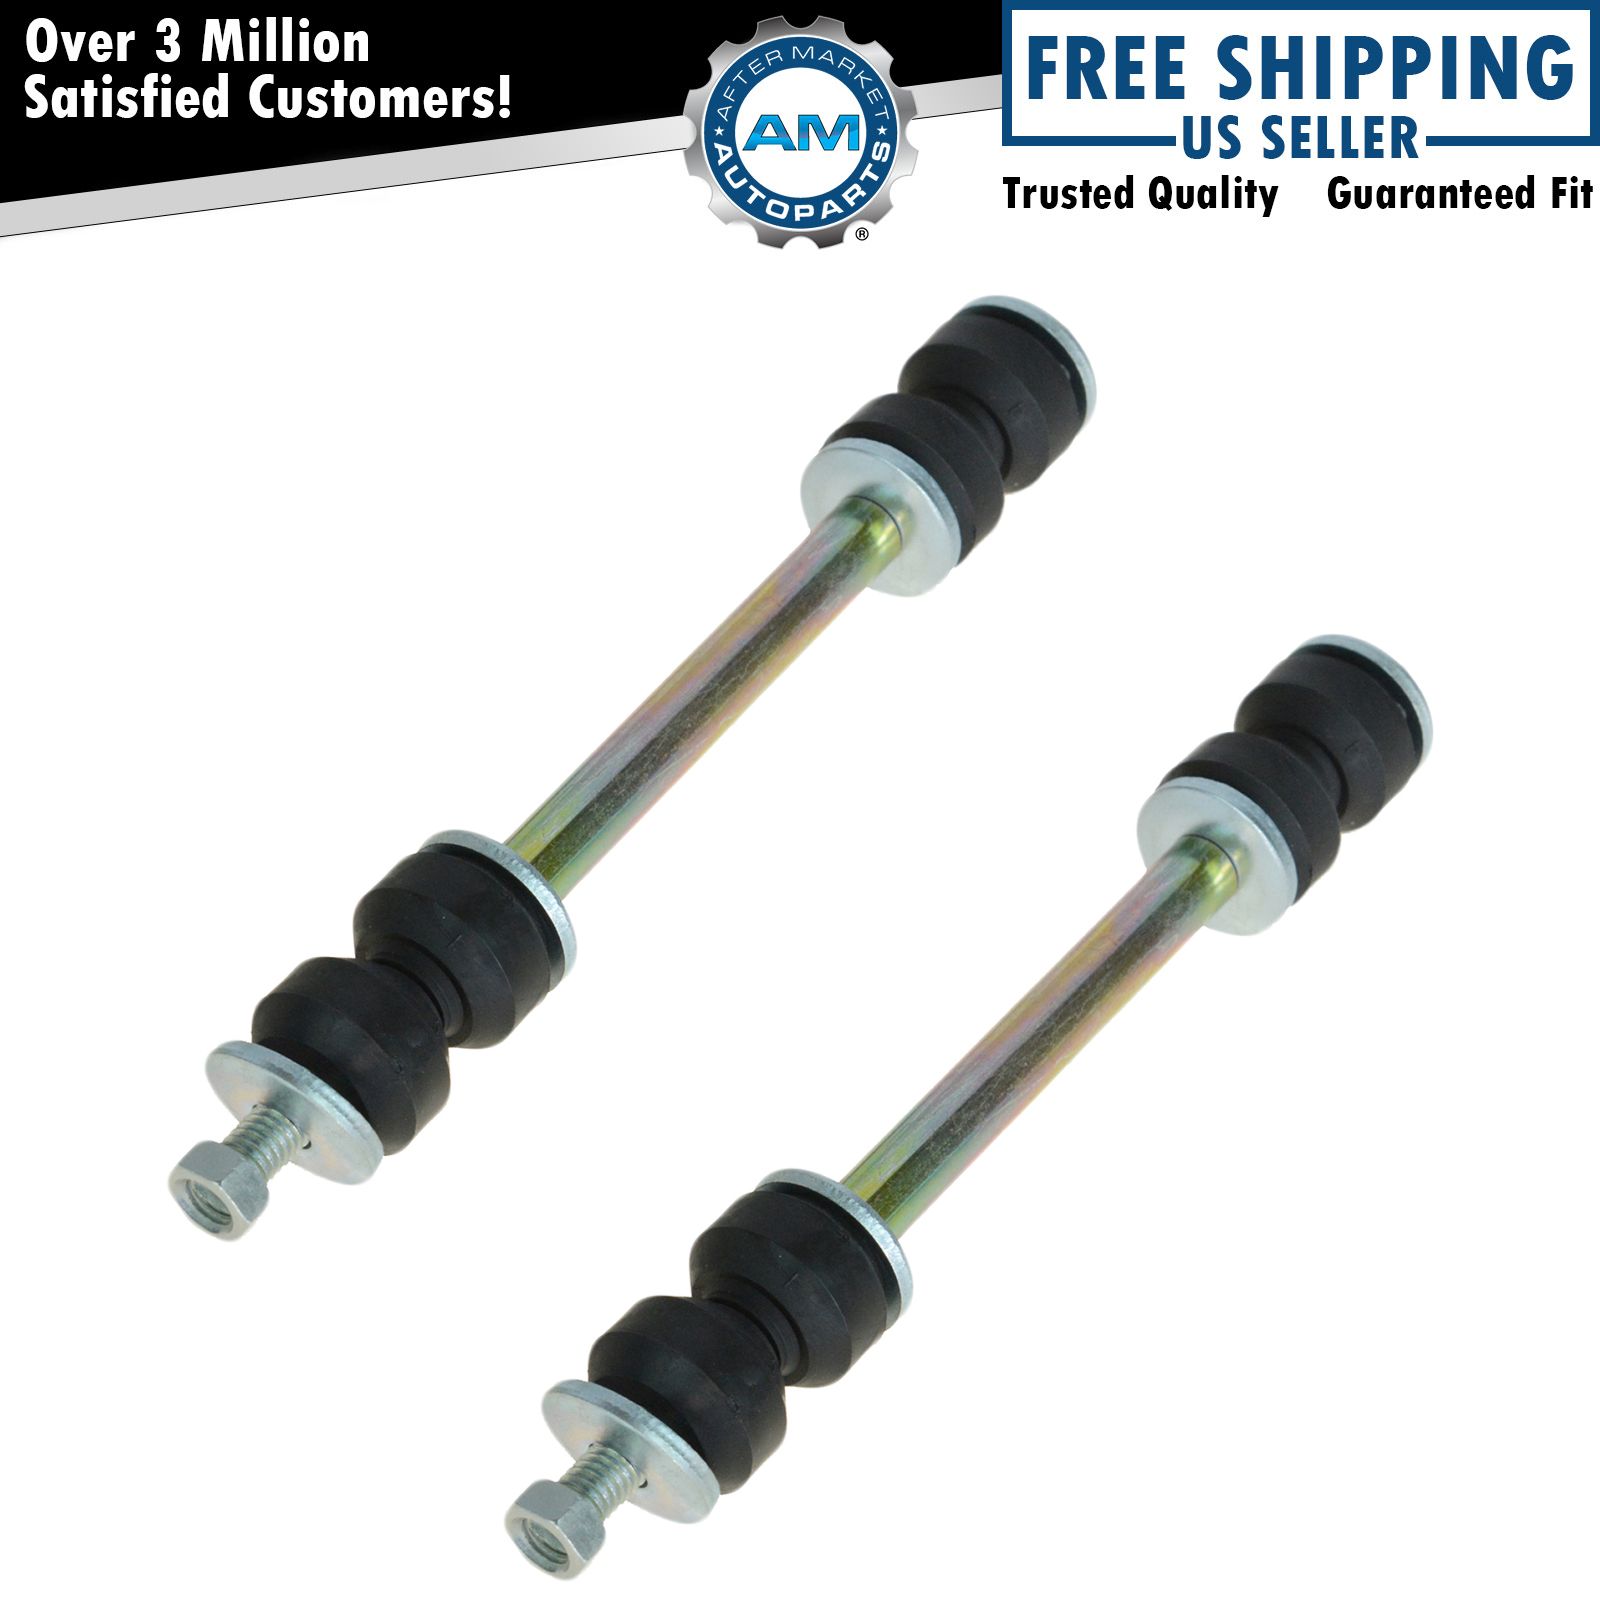 Front Stabilizer Sway Bar End Link Pair Kit Set for Chevy GMC Cadillac Hummer